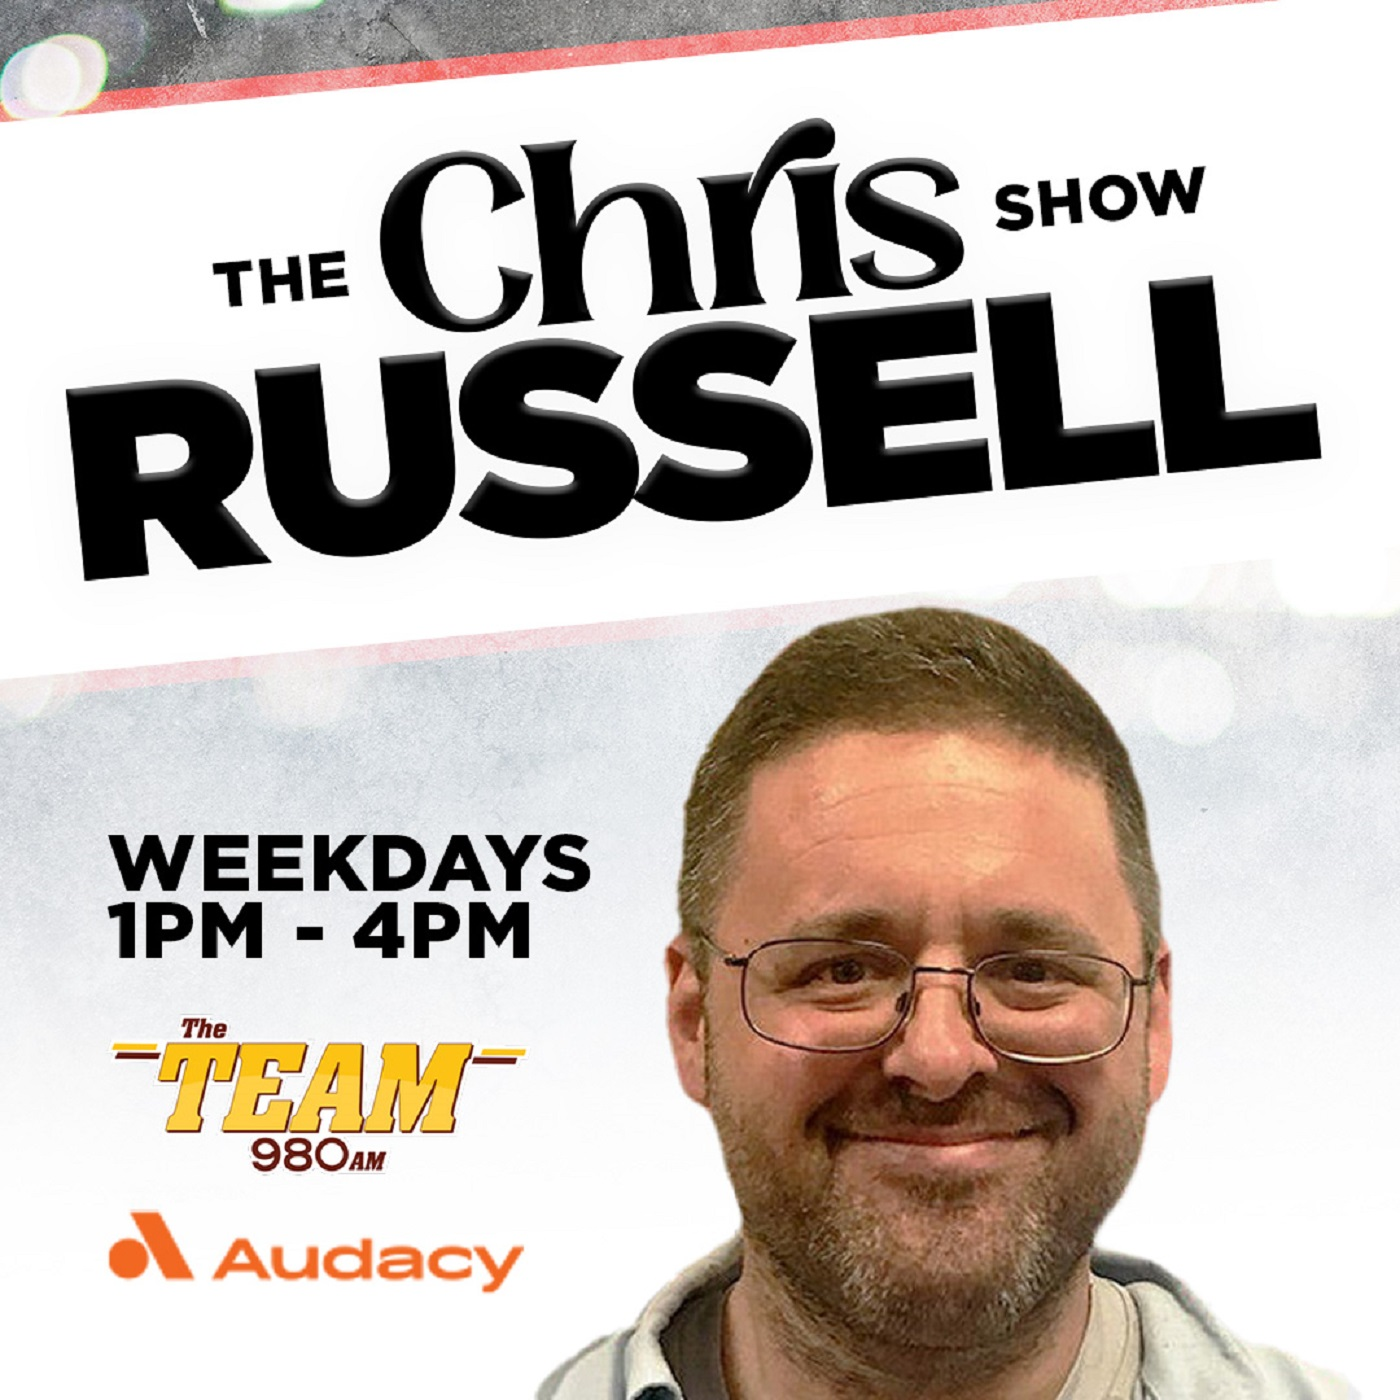 Tom Friend joins Russell on the Radio over OJ's passing